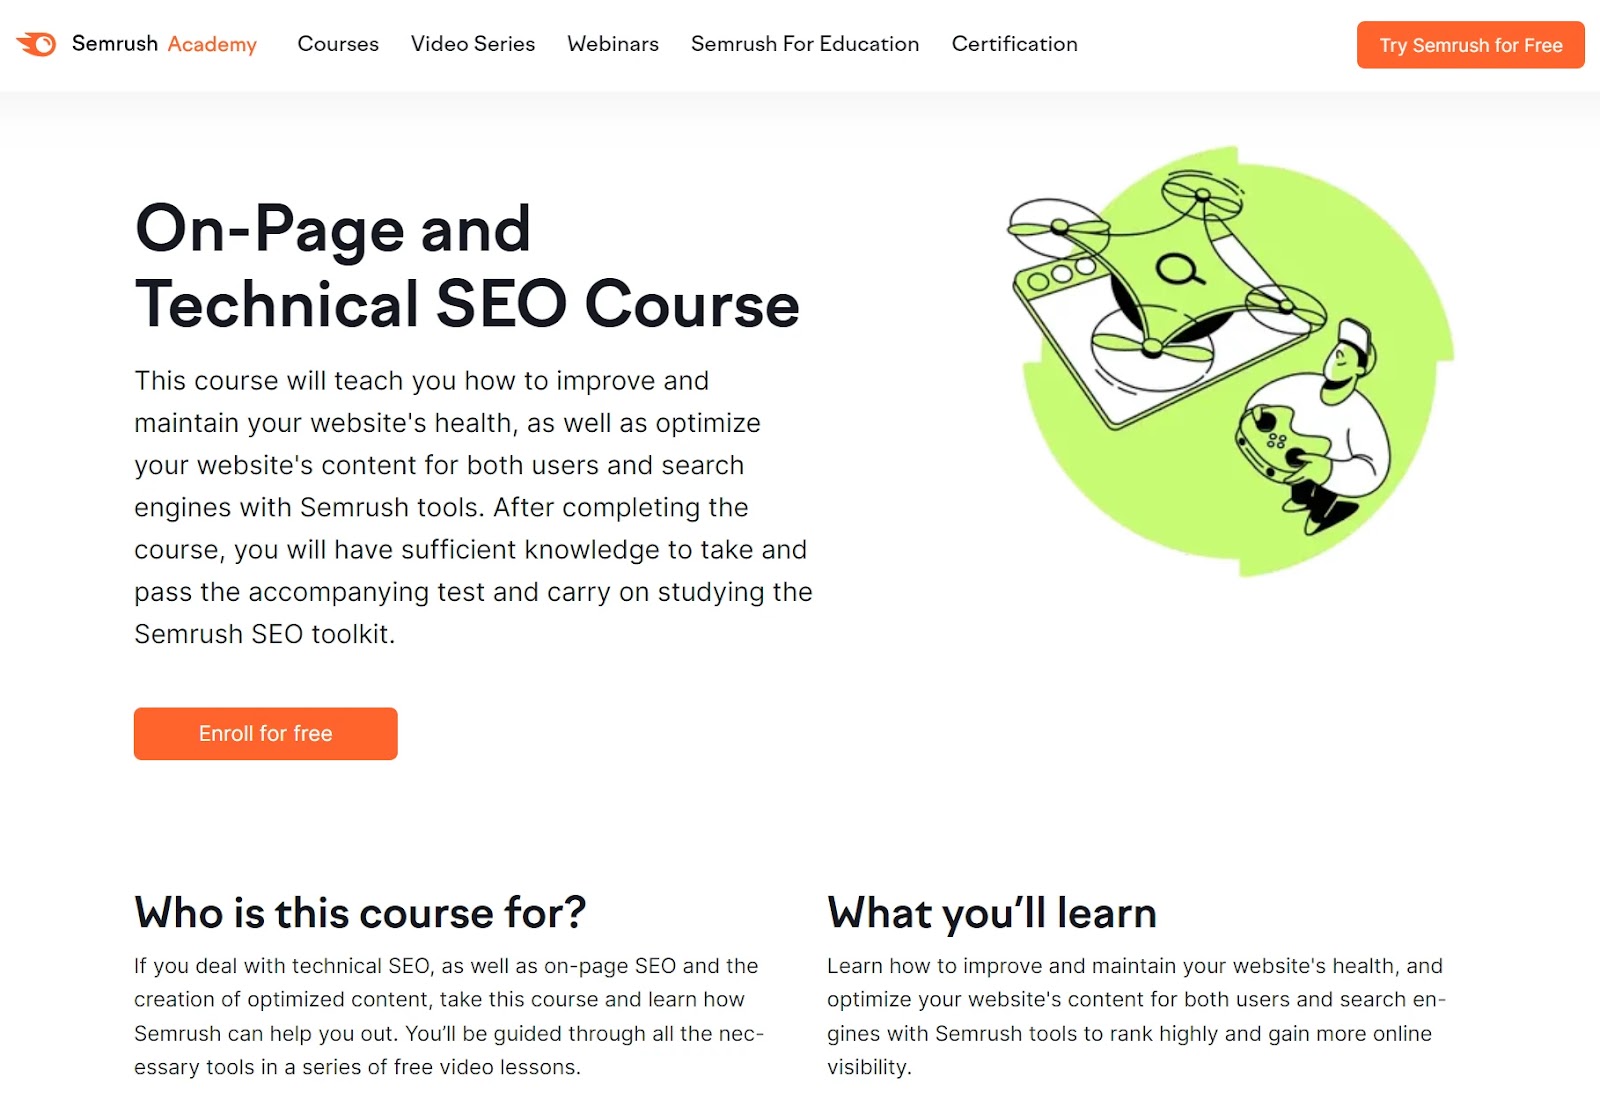 On-Page and Technical SEO Course landing page